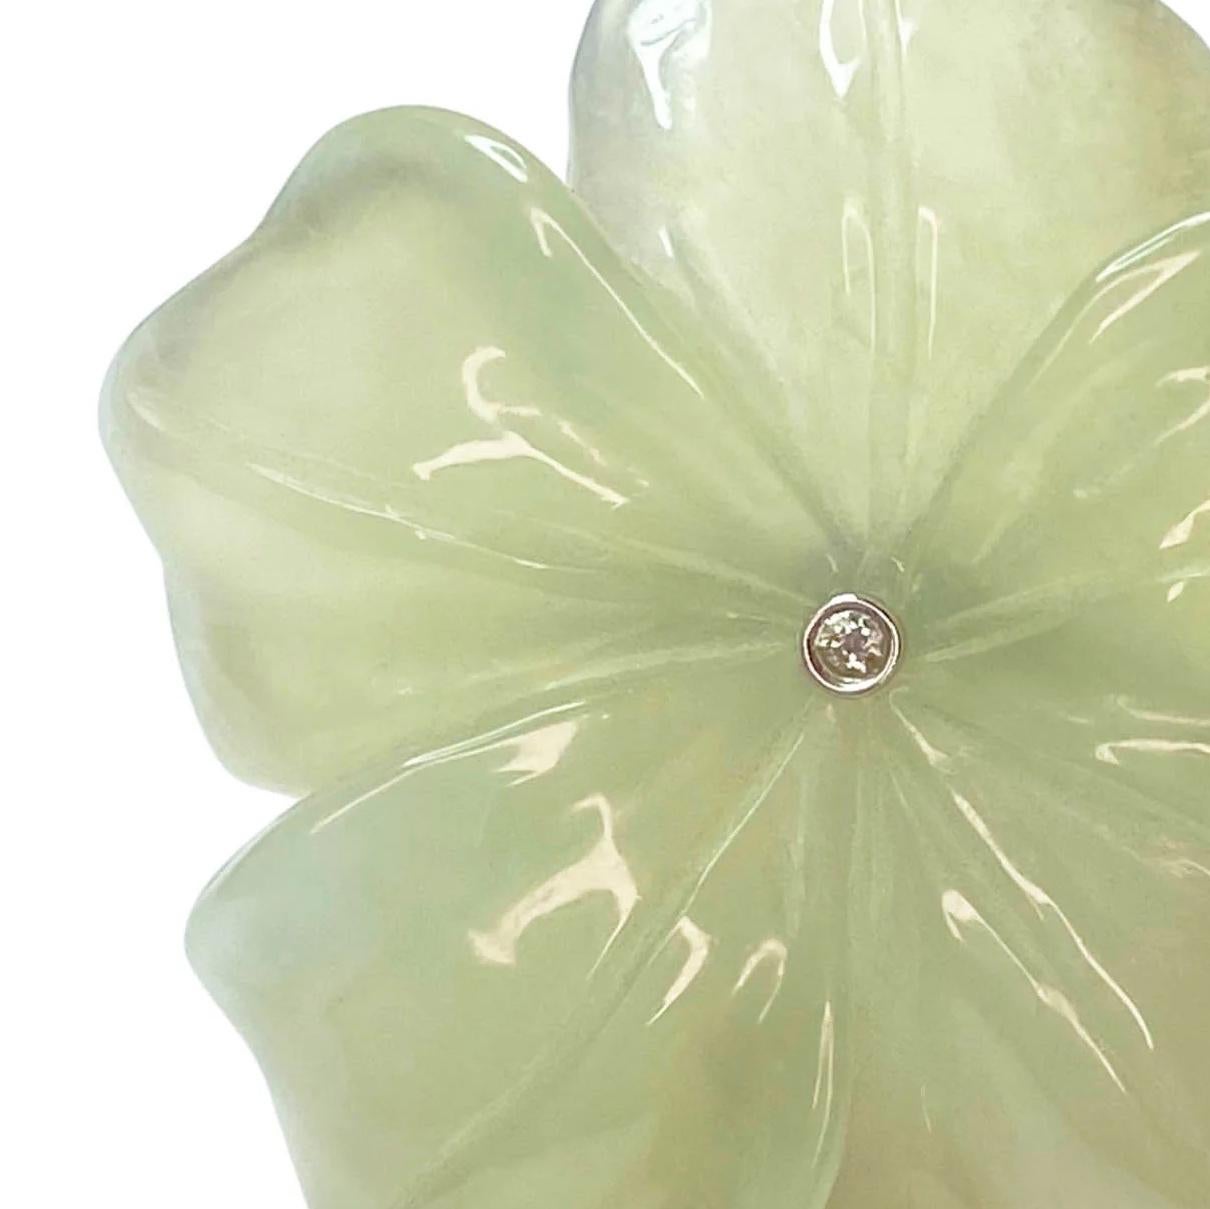 Hand carved Burmese Jade Flower ring with solid hand crafted 18k yellow gold and a White Diamond Centre.

A sculptural beauty,  the Jade Wild Flower and Diamond Double Ring sits beautifully and very comfortably on the hand.
This sophisticated